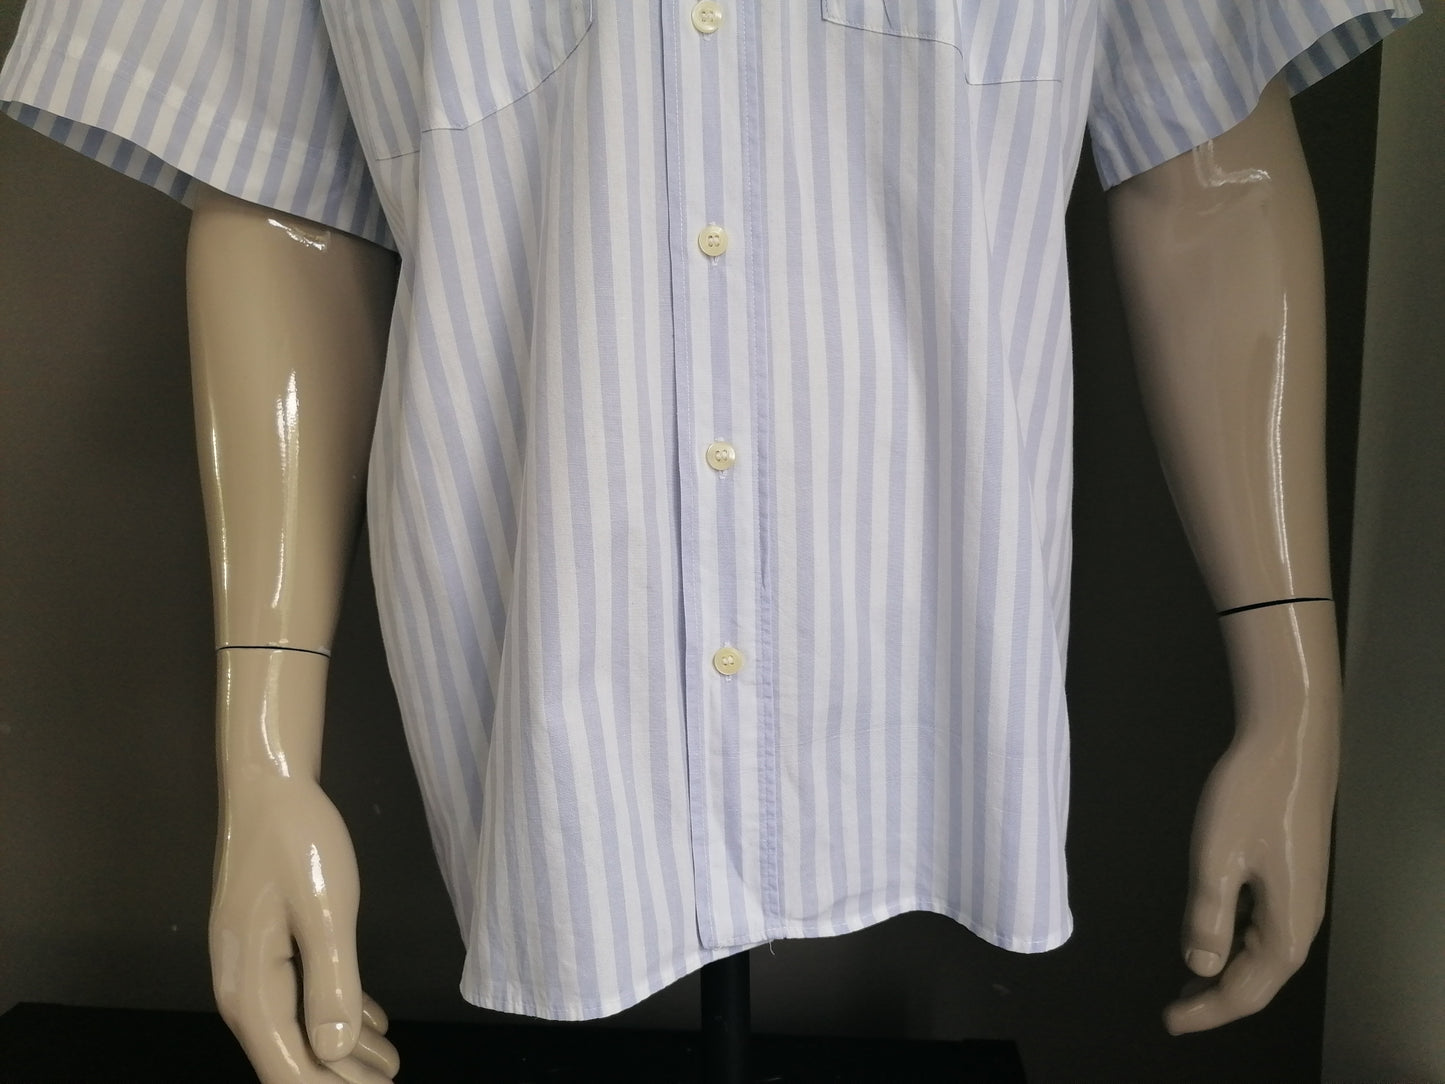 Vintage Short Sleeve Shirt. Blue white with embroidered sunglasses accent. Size XL.